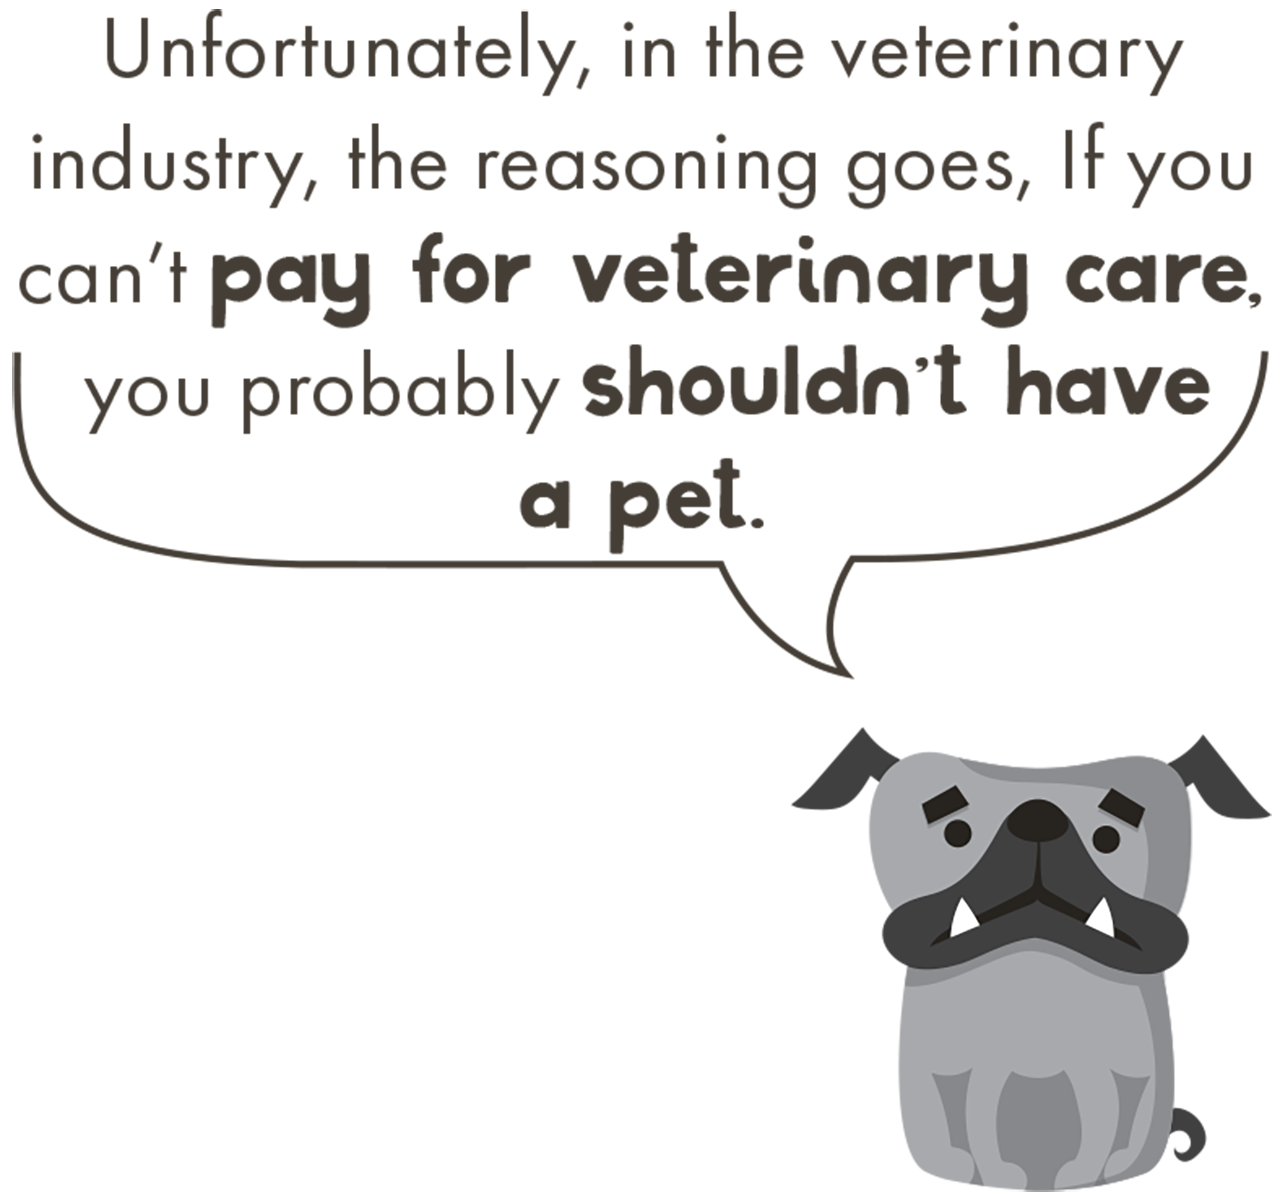 Digital illustration of a dog and a chat bubble floating above dog's head stating "Unfortunately, in the veterinary industry, the reasoning goes, If you can't pay for veterinary care, you probably shouldn't have a pet."